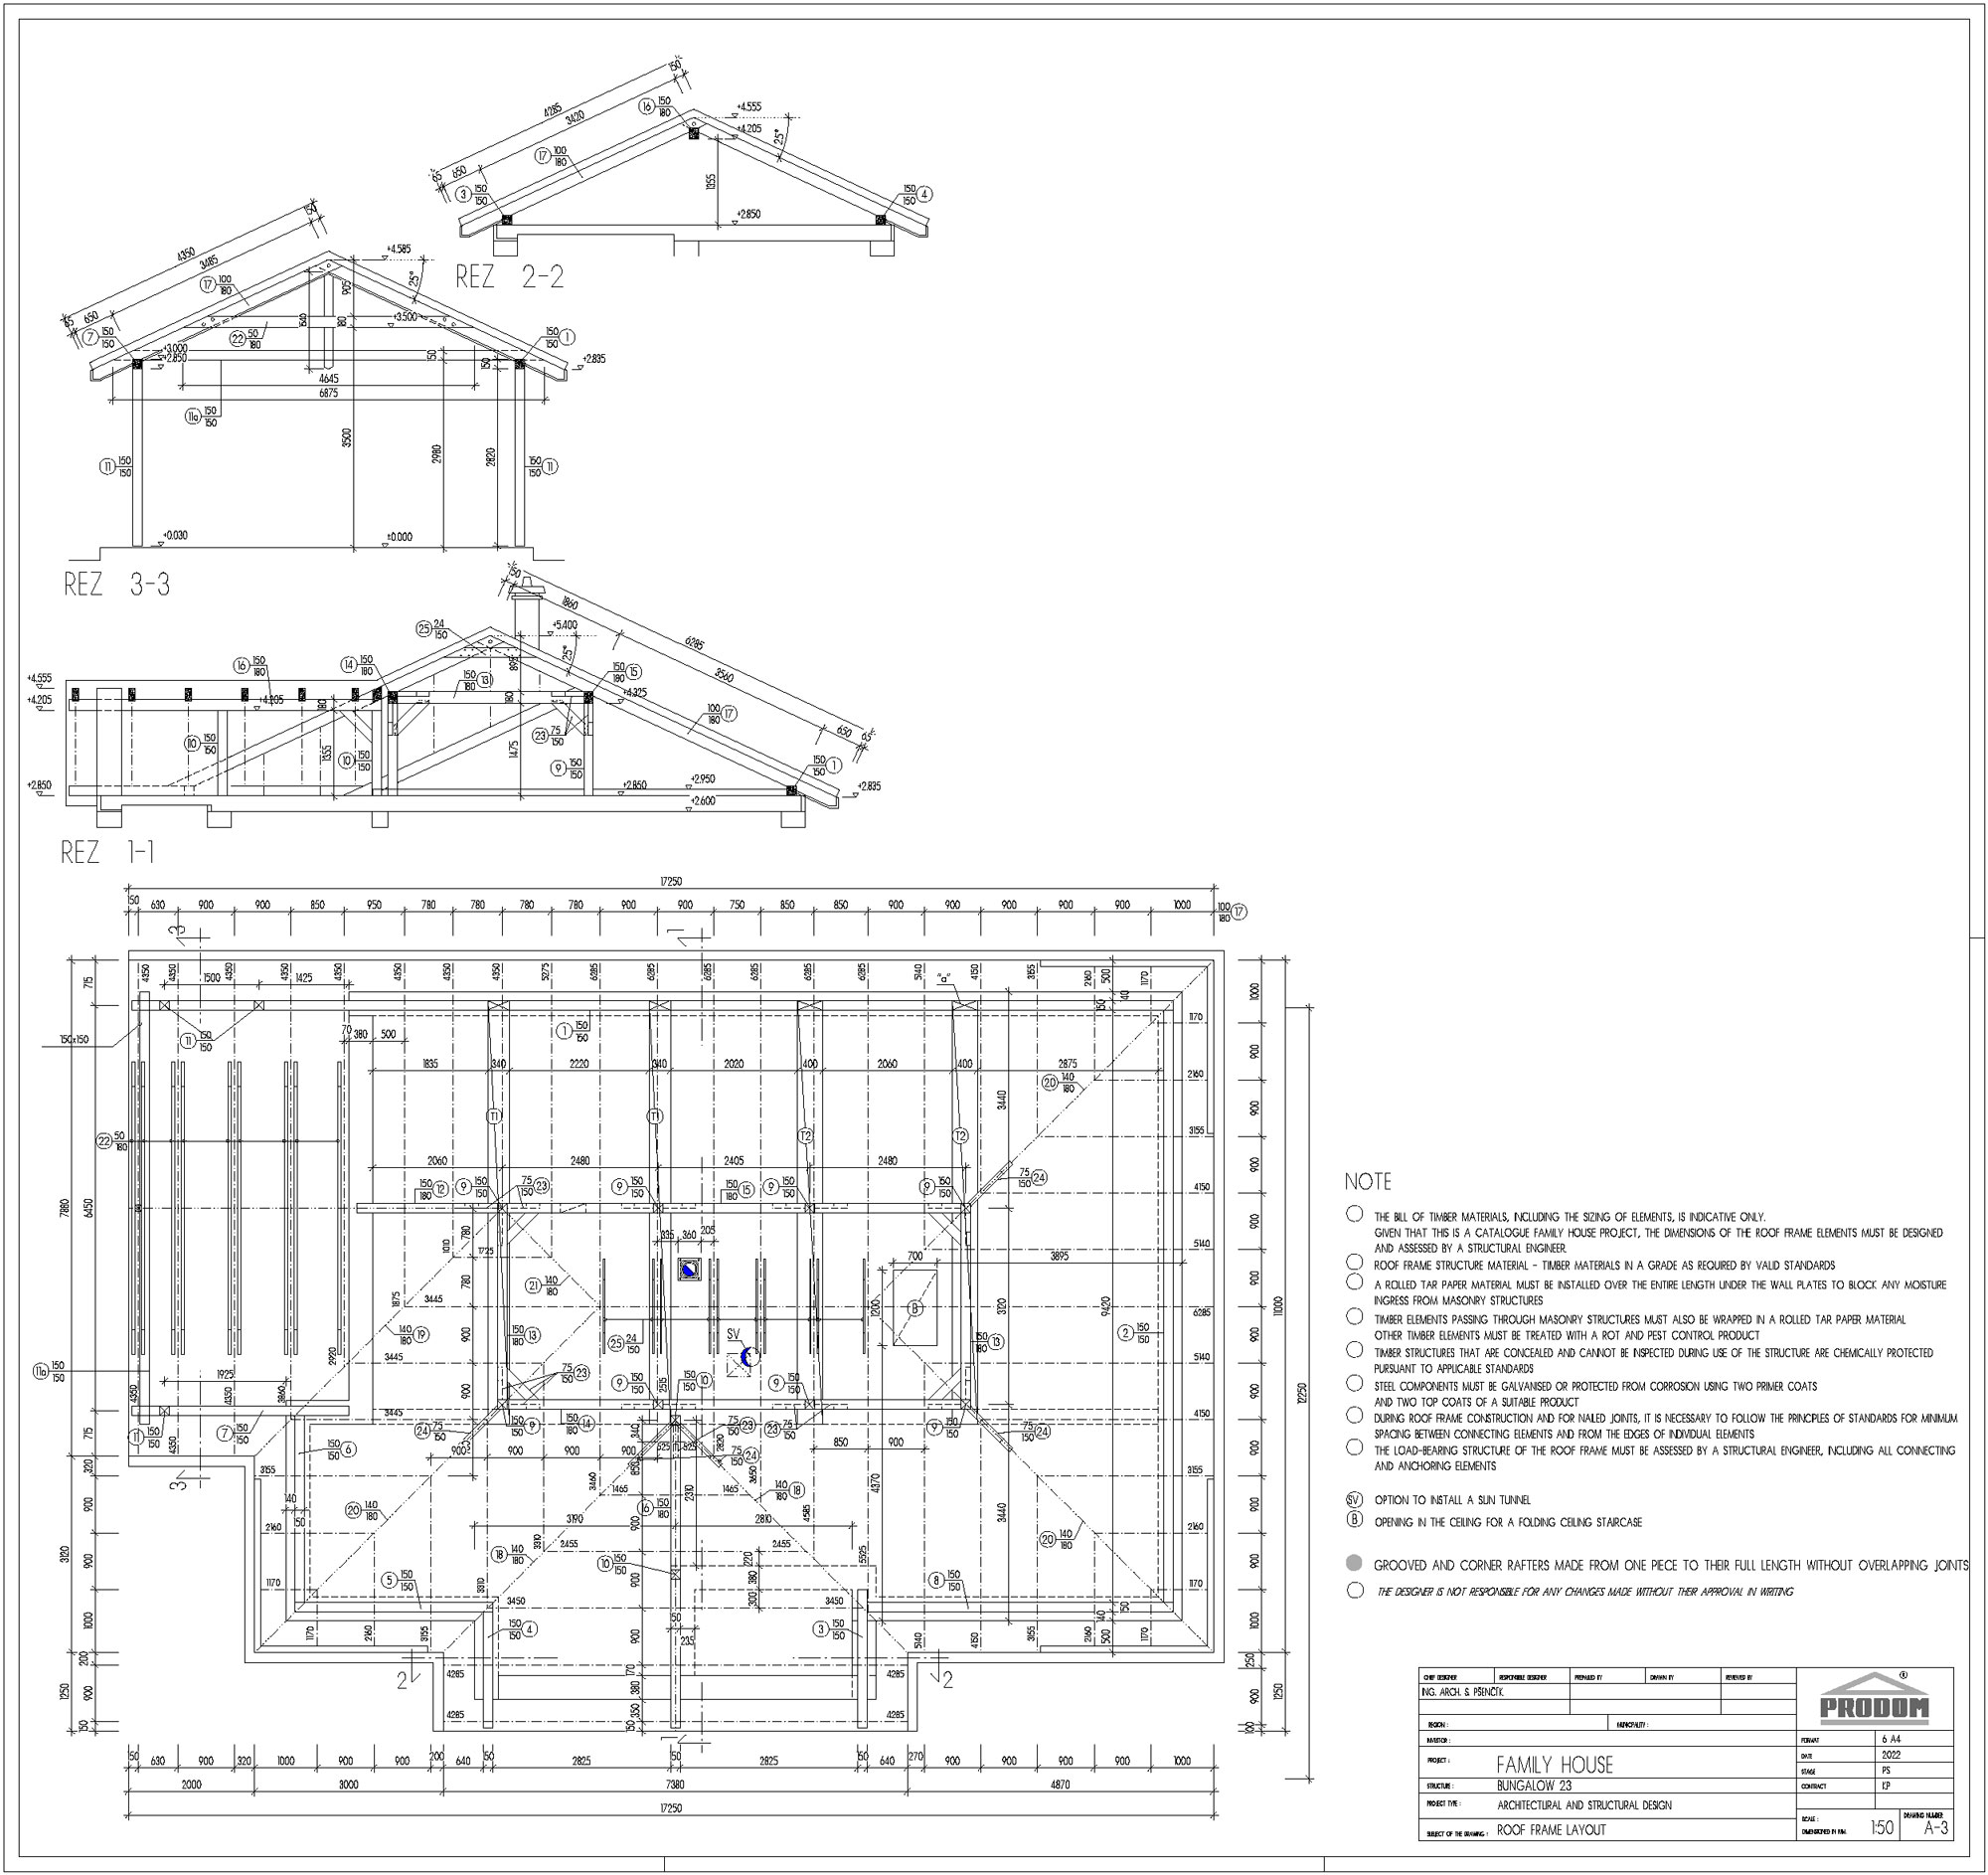 B23_03_ROOF FRAME LAYOUT_eng